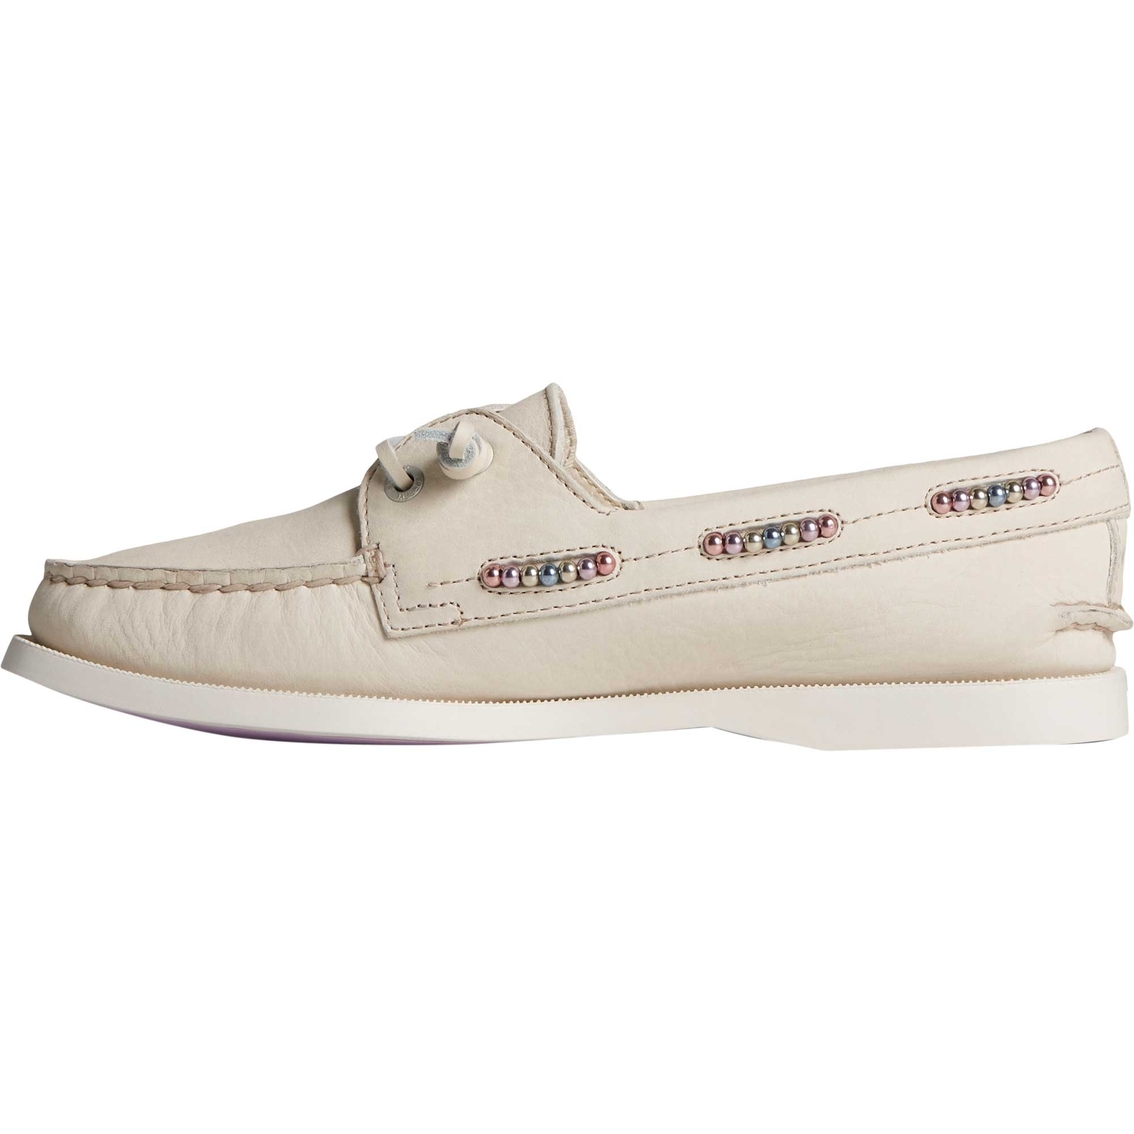 Sperry Women's Authentic Original 2 Eye Beaded Boat Shoes - Image 3 of 6